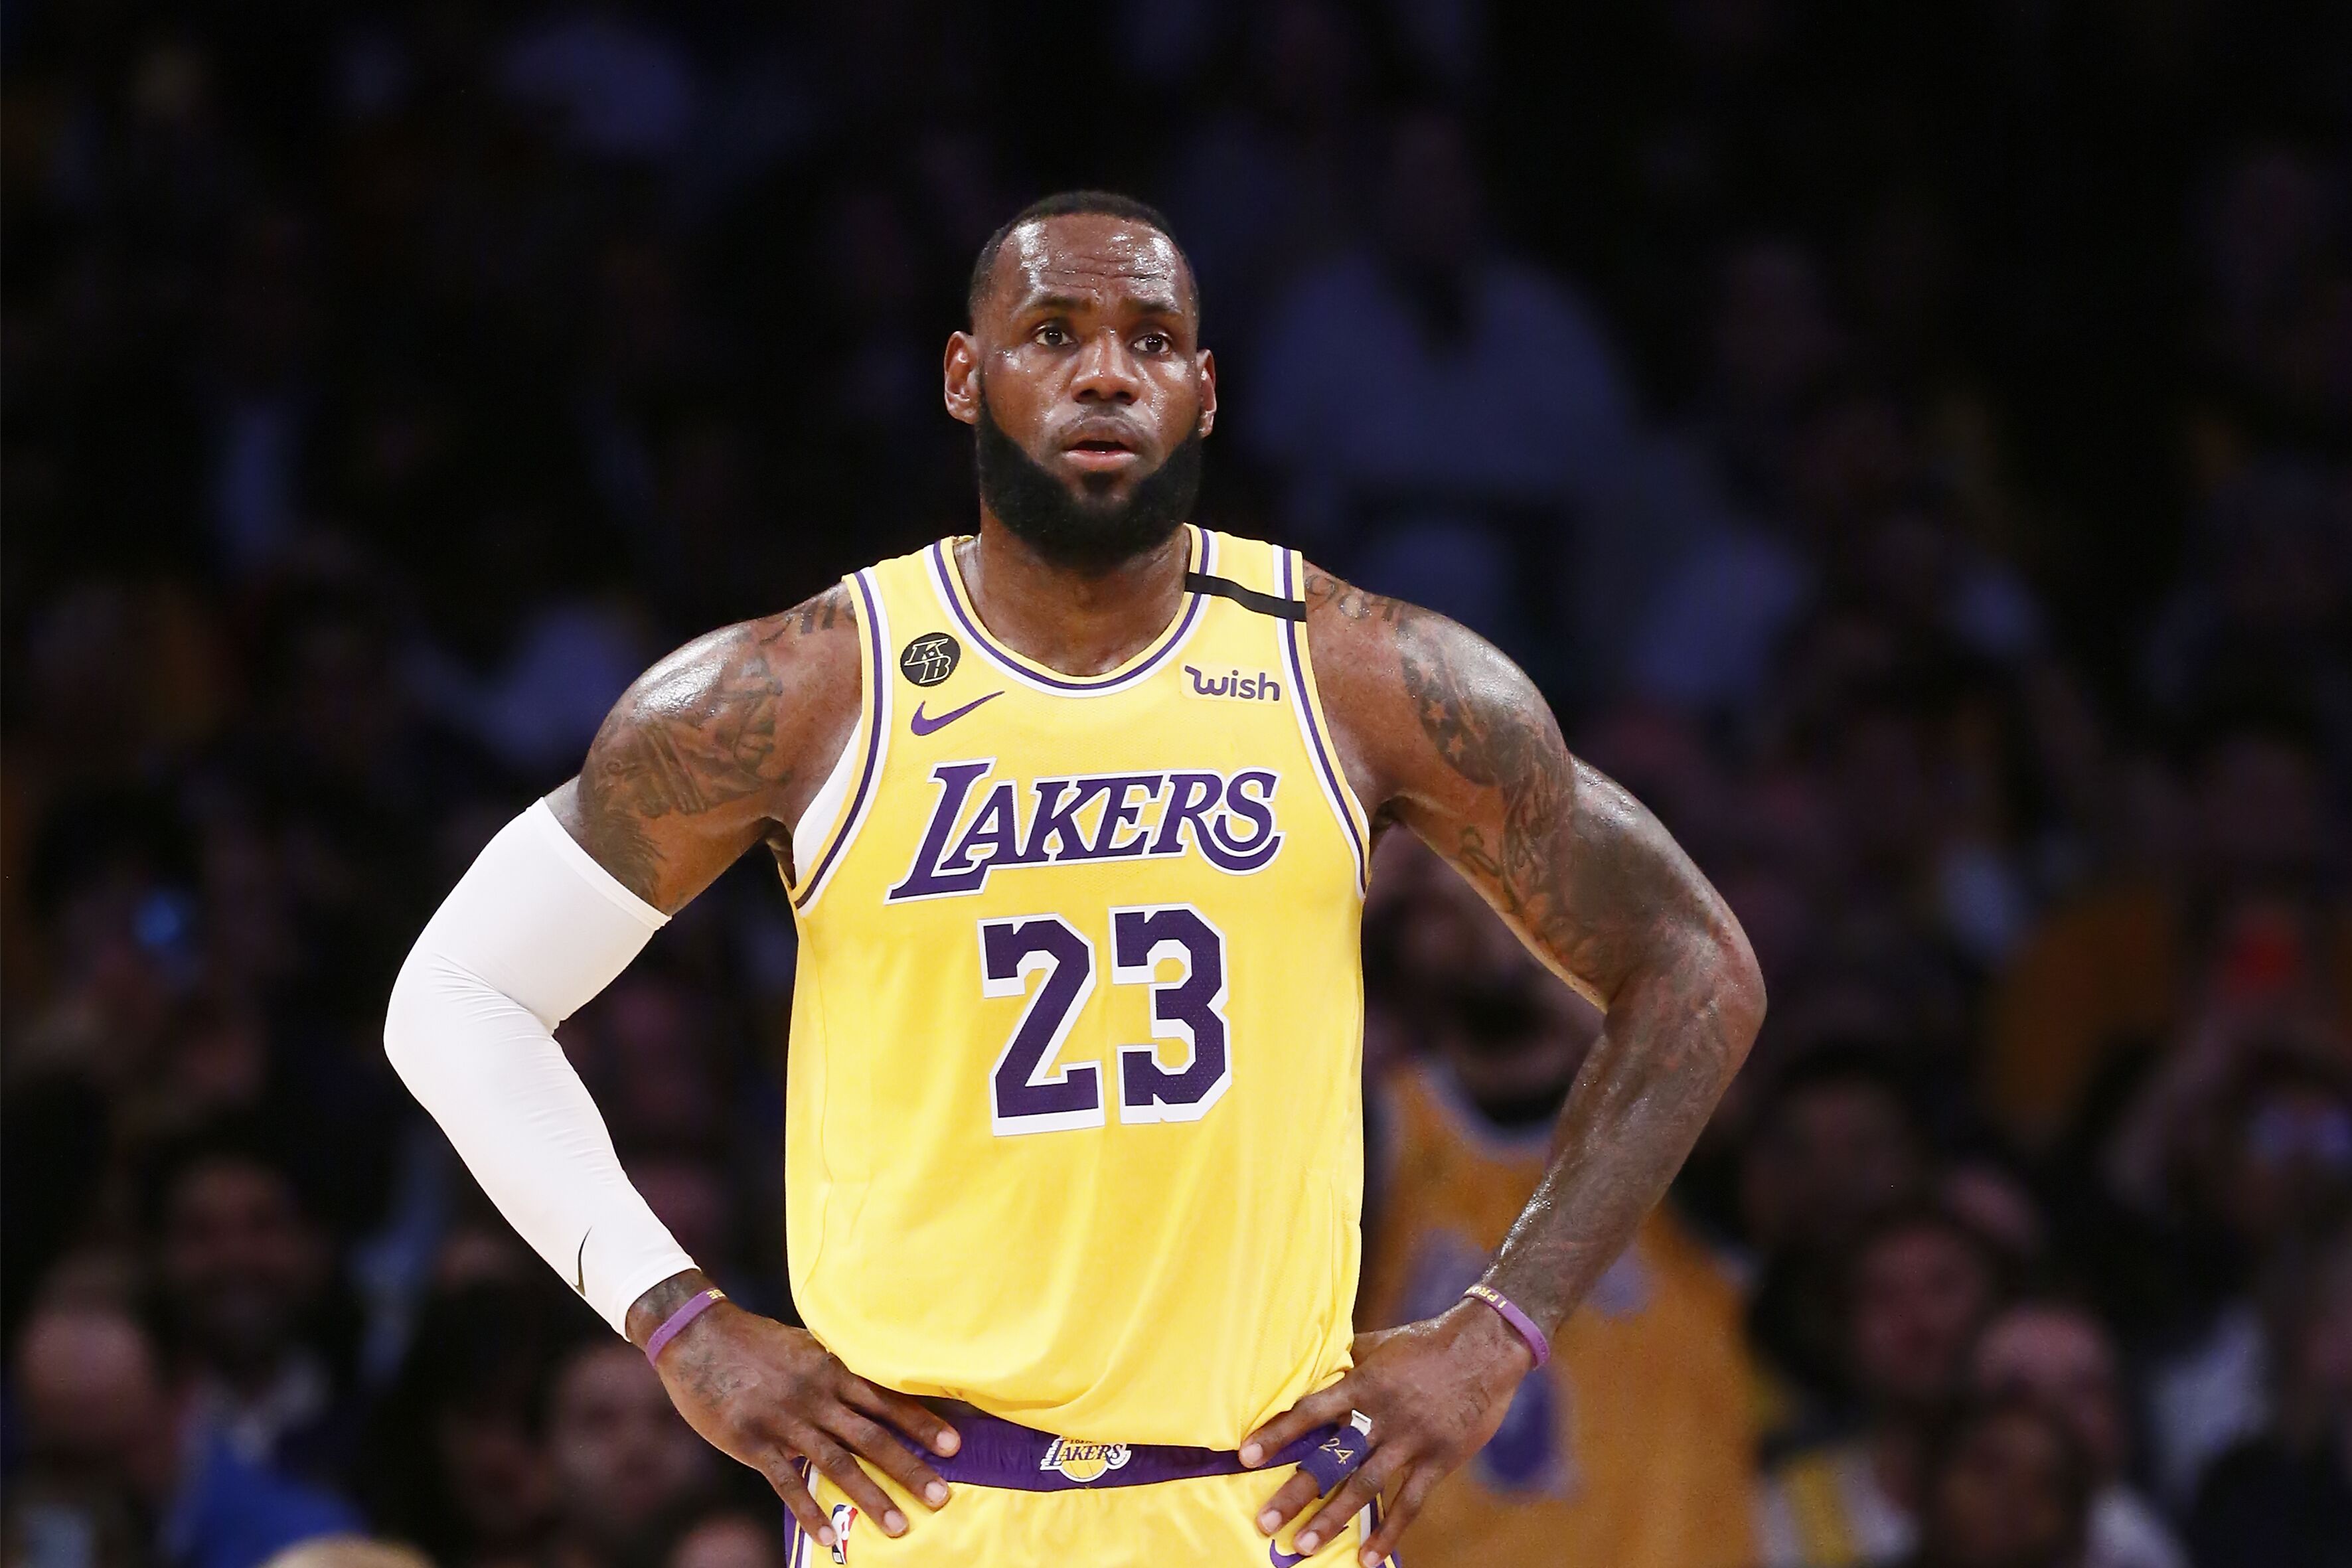 LeBron James looks on during a game against the Brooklyn Nets at the Staples Center on March 10, 2020. | Photo: Getty Images